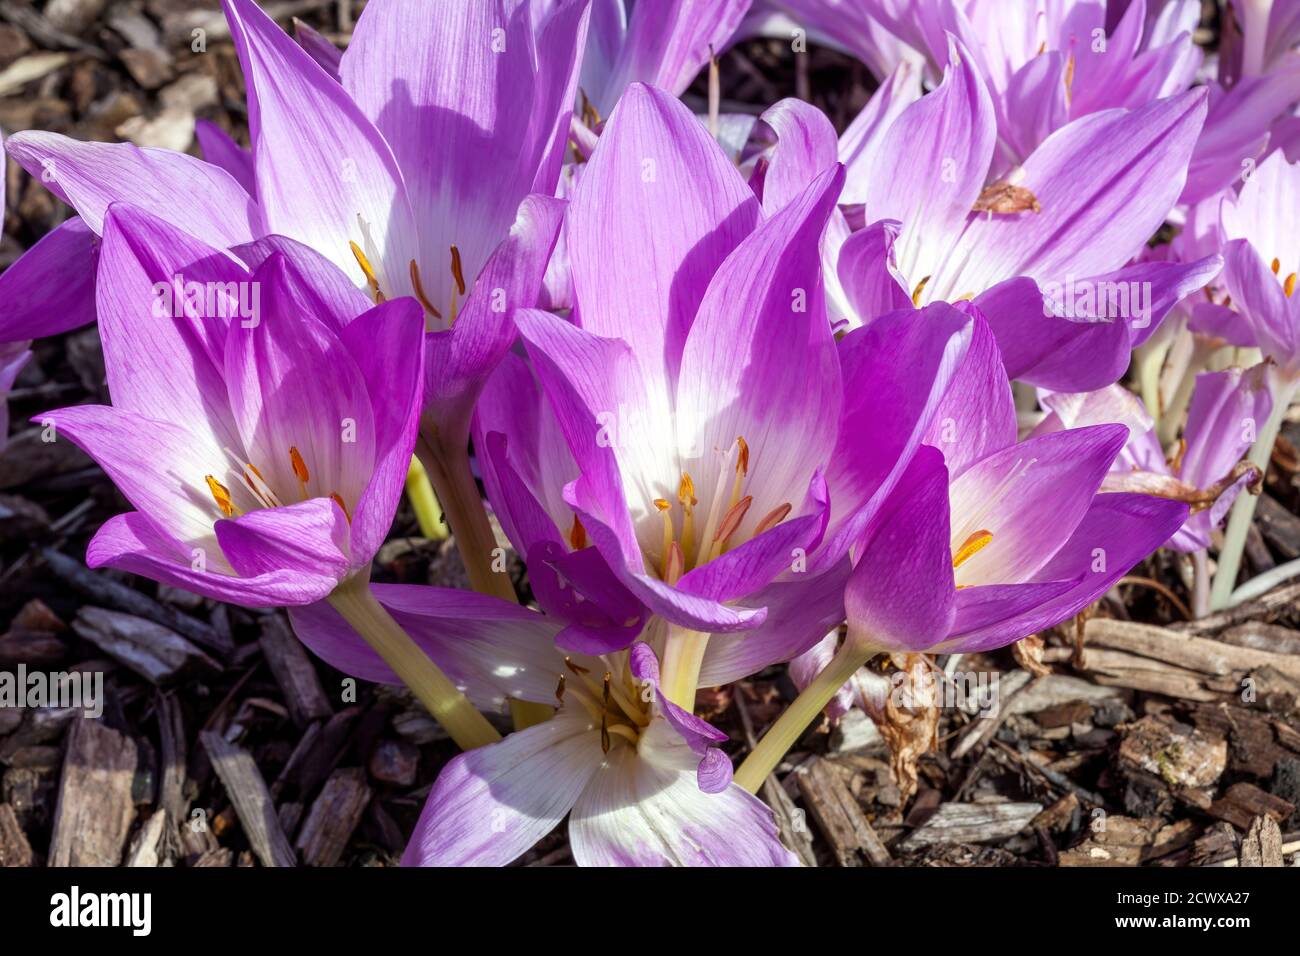 Colchicum autumnale 'Waterlily' an autumn fall flower bulb plant commonly known as Autumn Crocus stock photo image Stock Photo